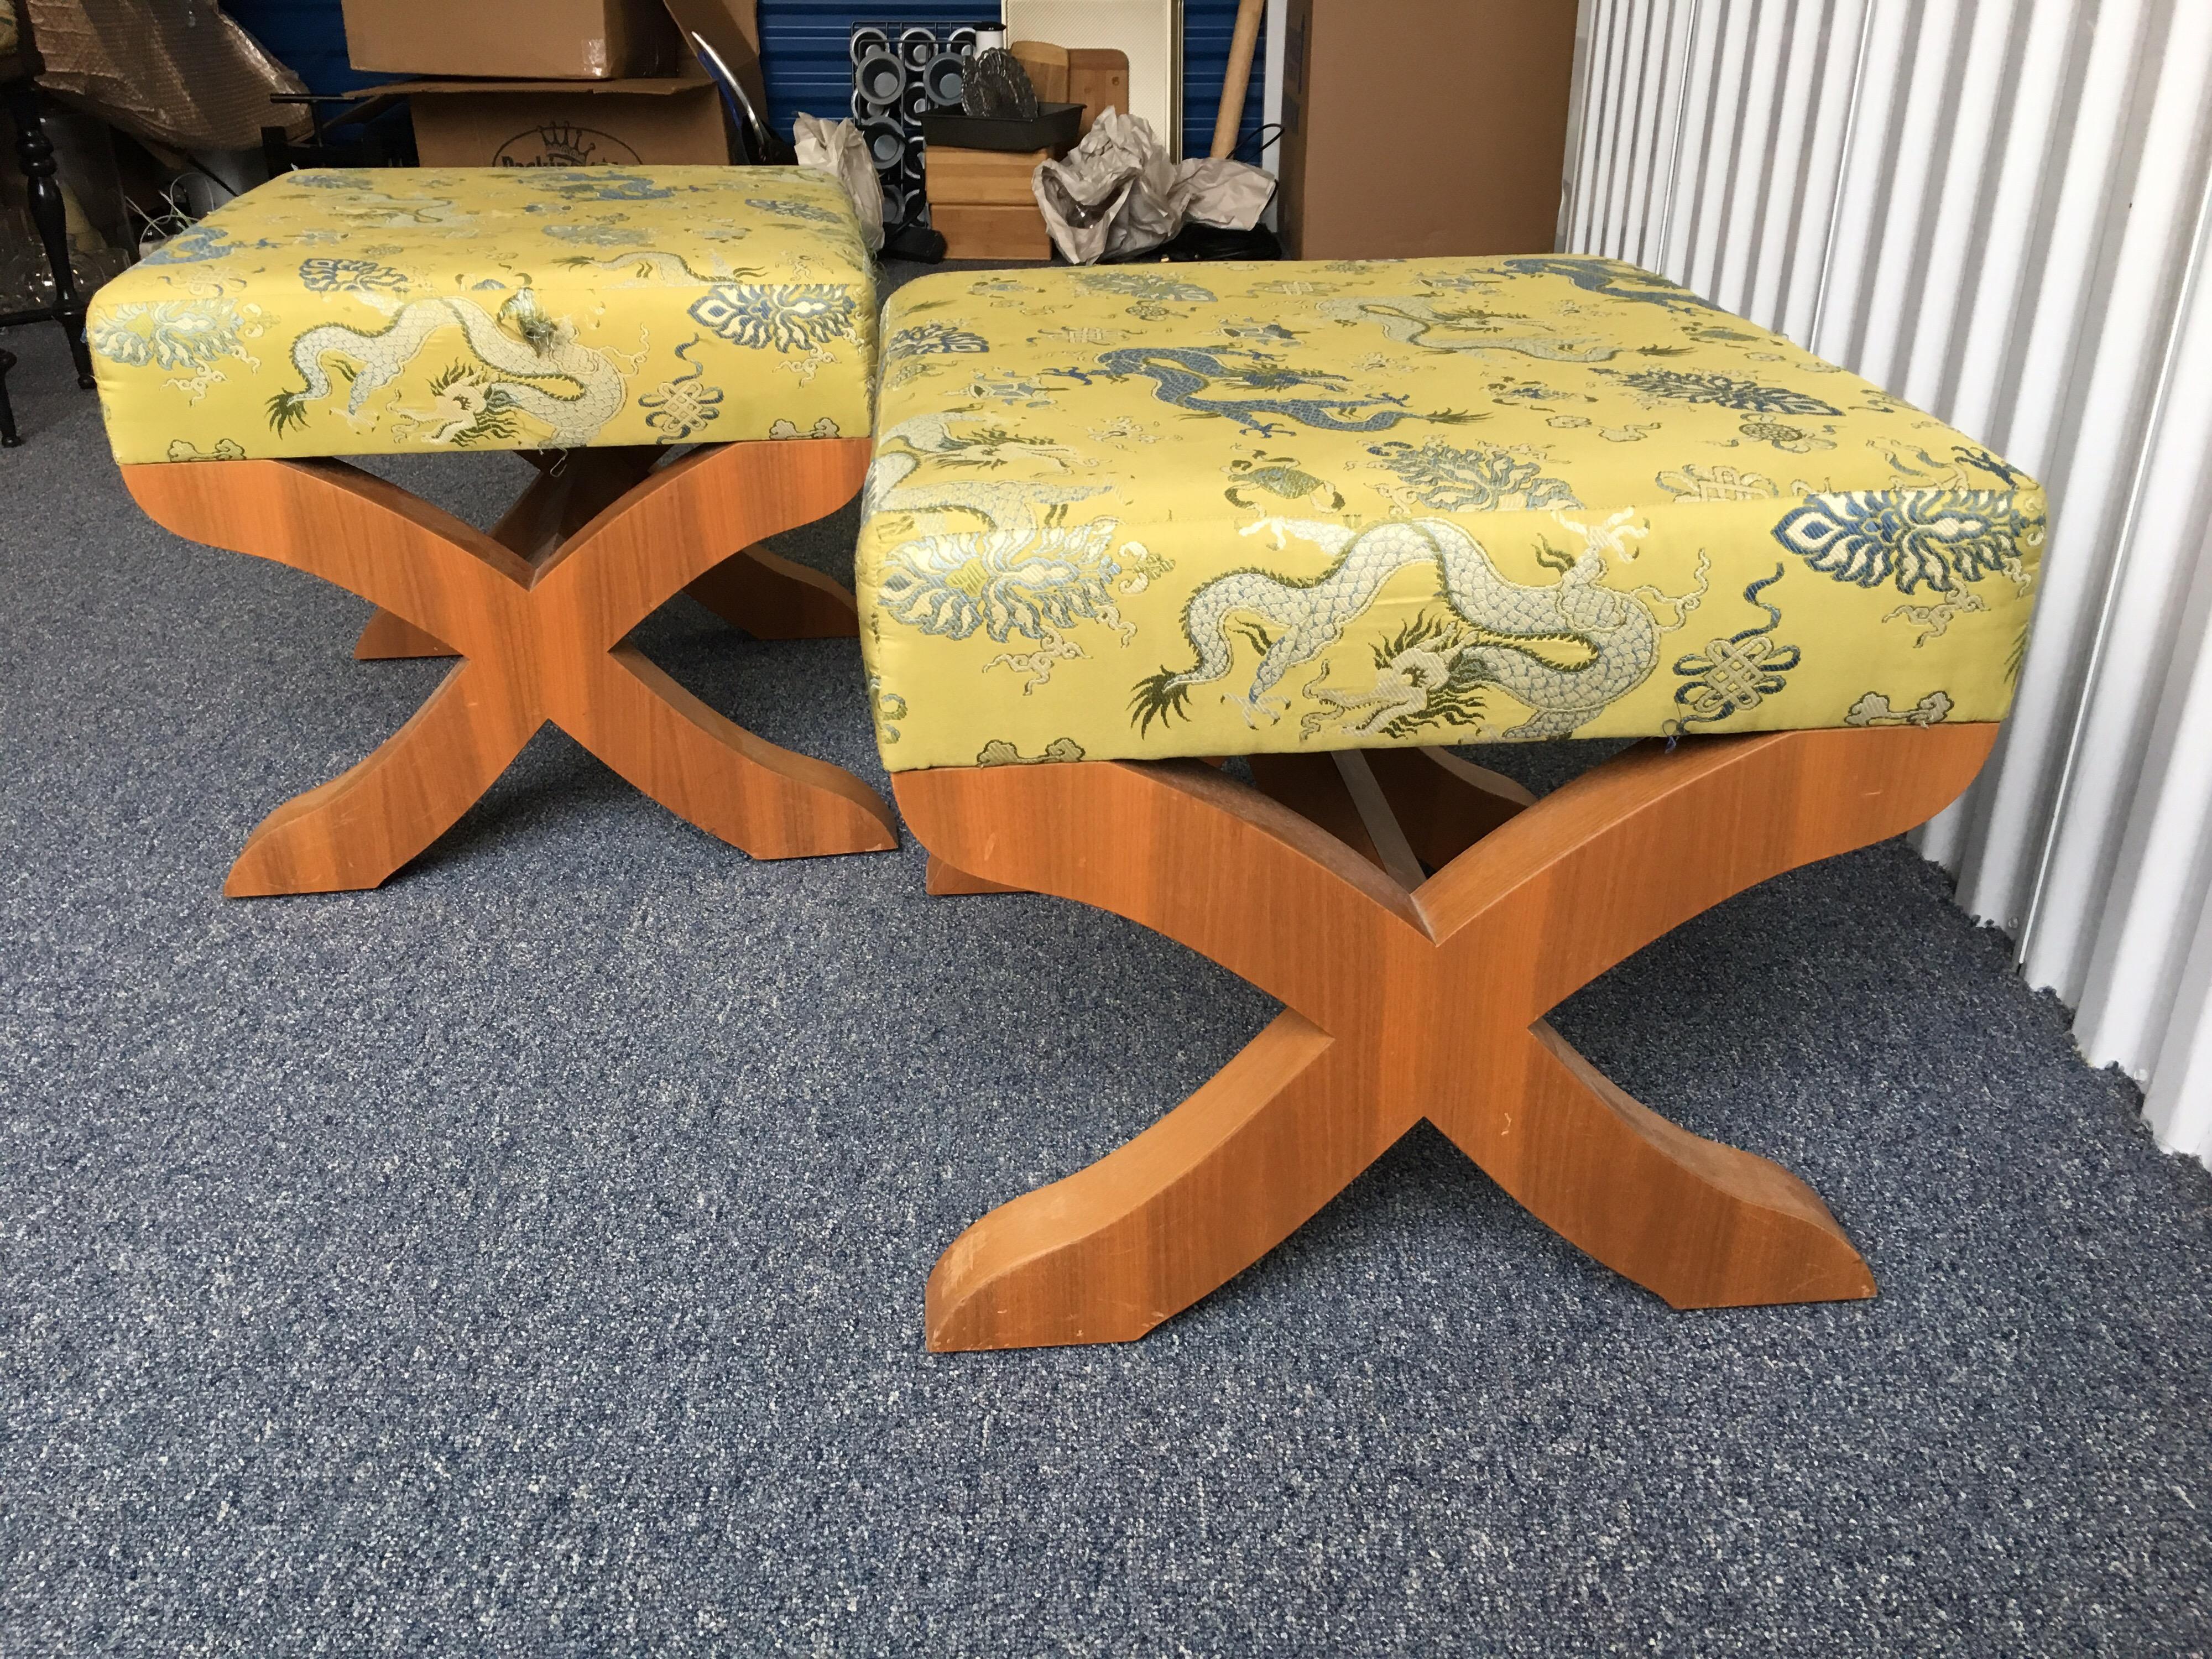 Pair of X-base stools in silk embroidered fabric, custom made X-base stools in lime green and blue embroidered fabric. Some scratches to bases, fabric has thread pulls in some areas. Frame in good stable condition.